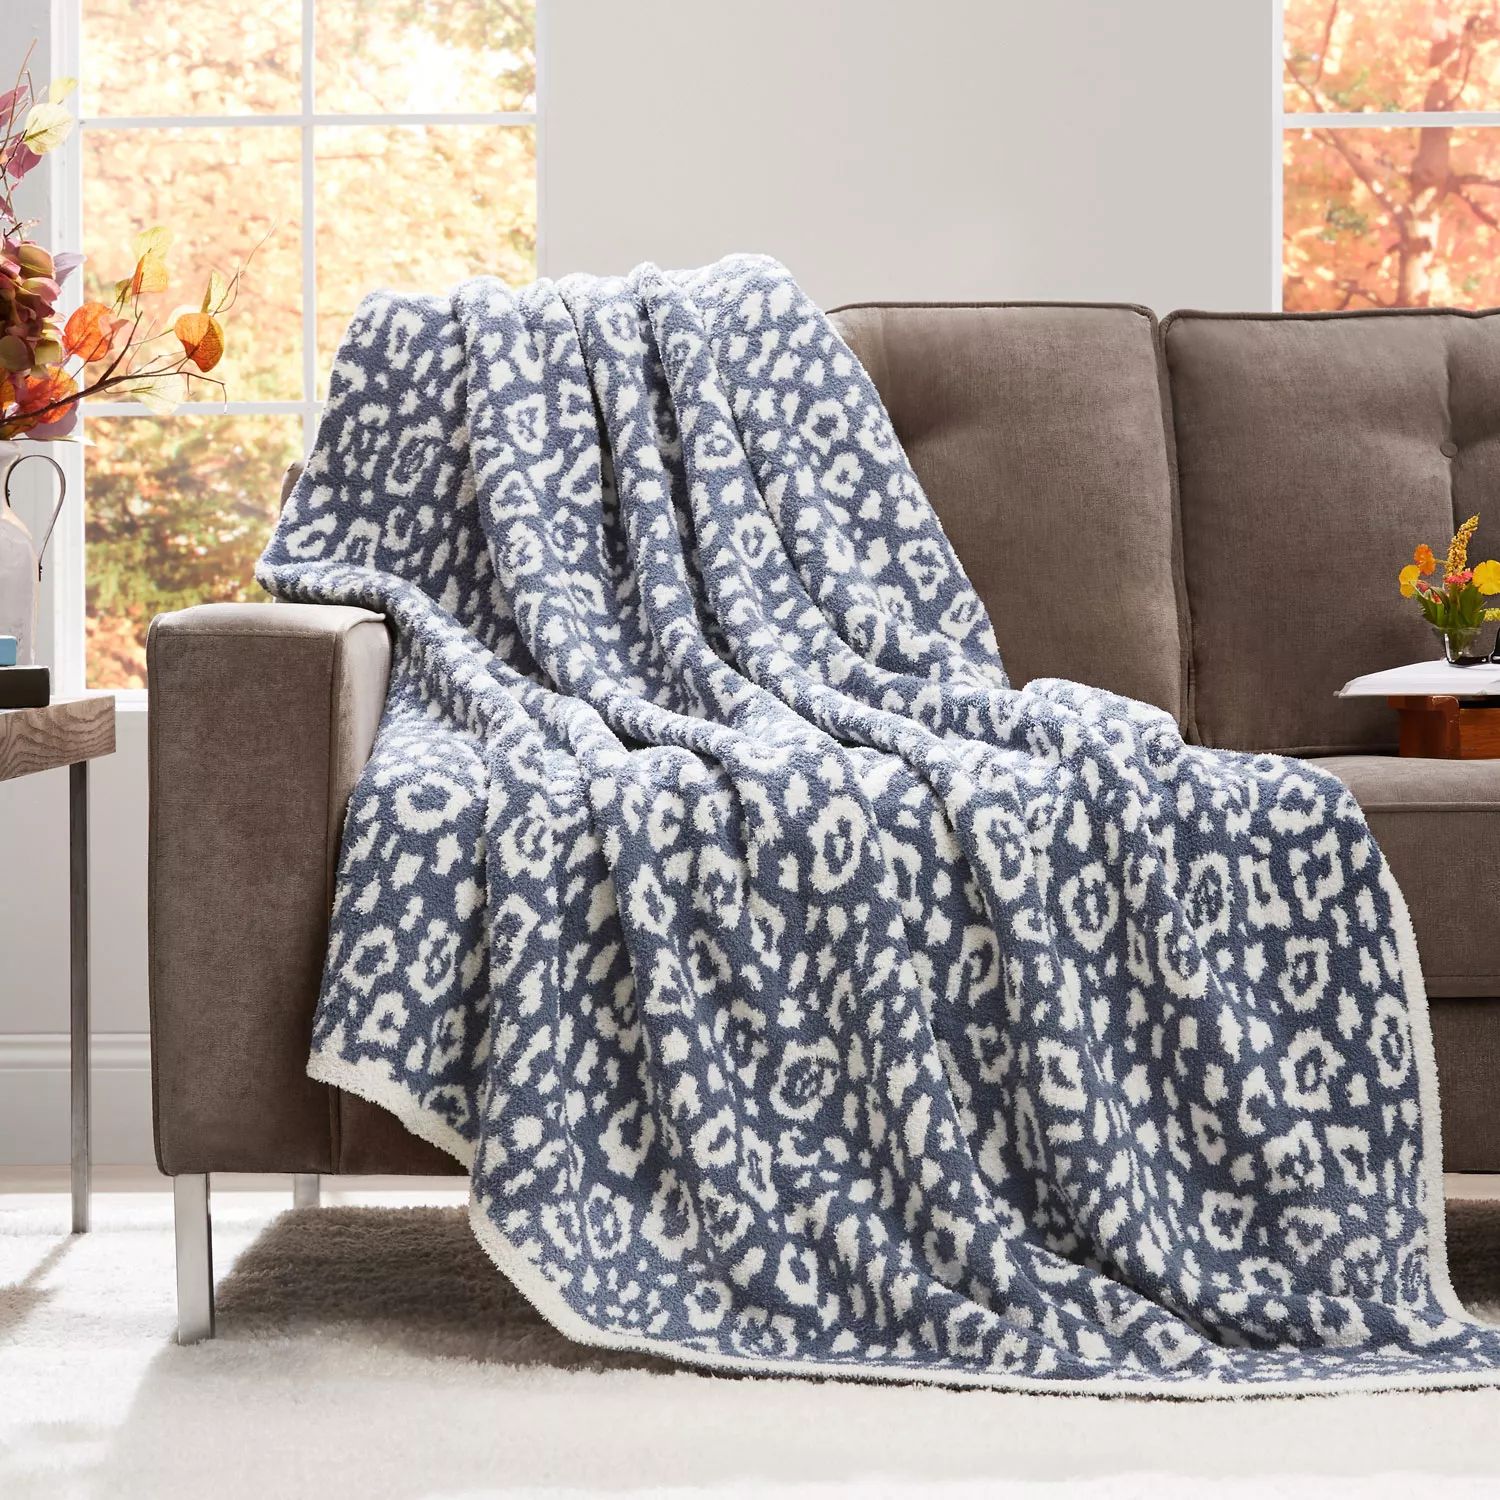 Member’s Mark Luxury Premier Collection Cozy Knit Animal Print Throw (Assorted Colors) | Sam's Club